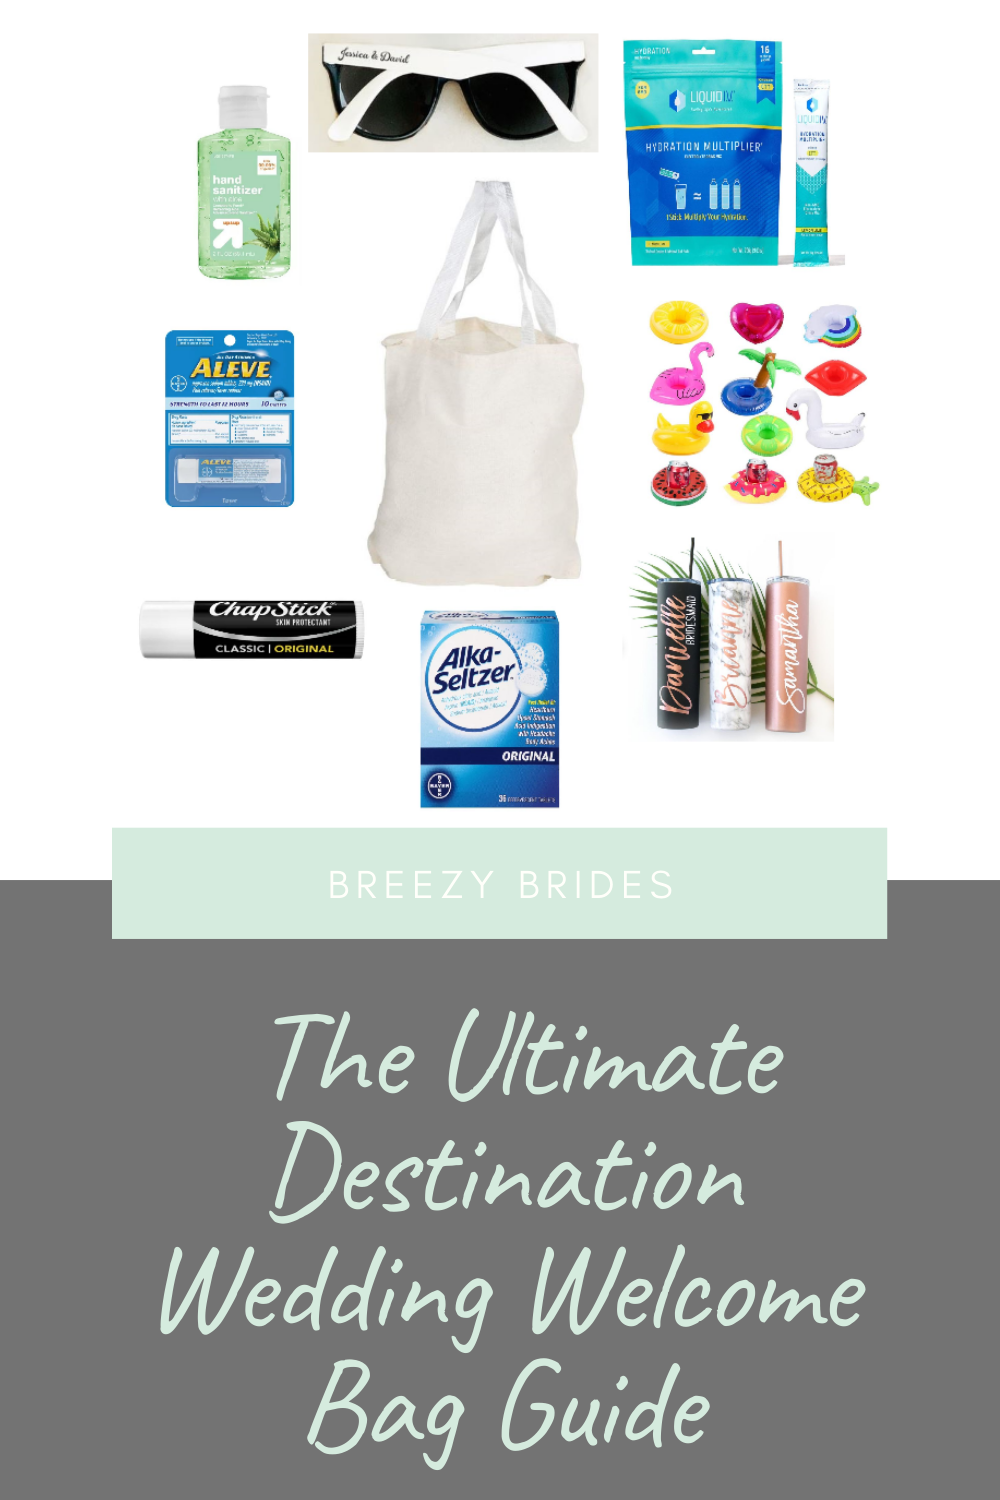 MHW's Guide to Wedding Welcome Bags - My Hotel Wedding